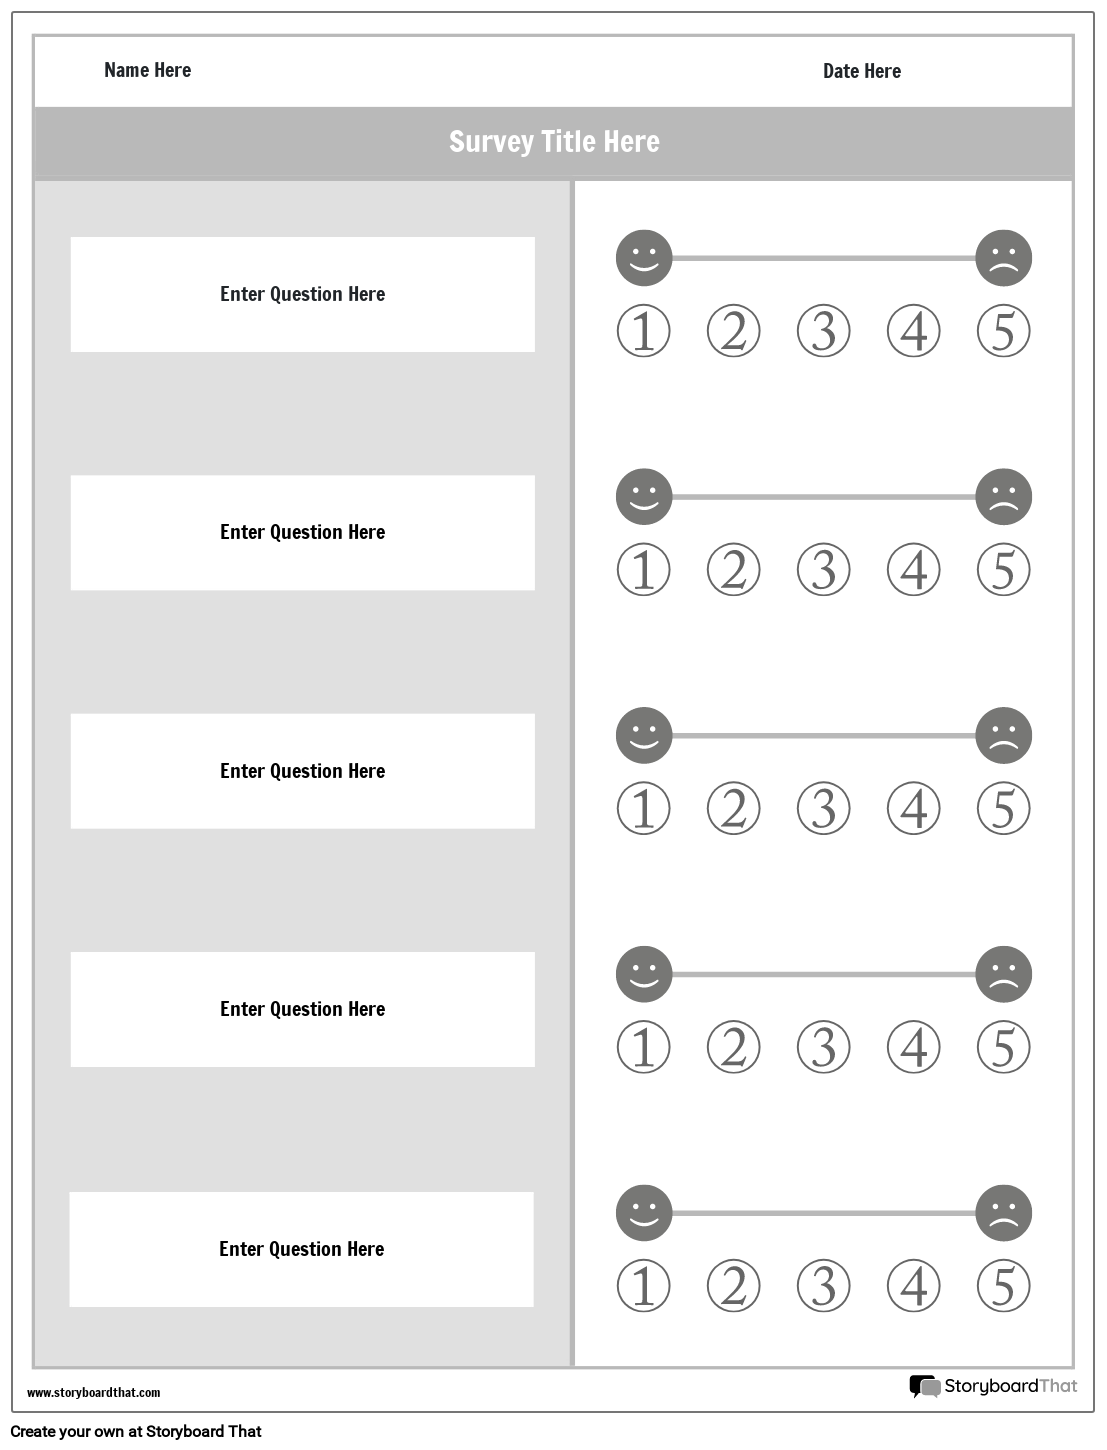 New Create Page Survey Template 2 (Black & White)